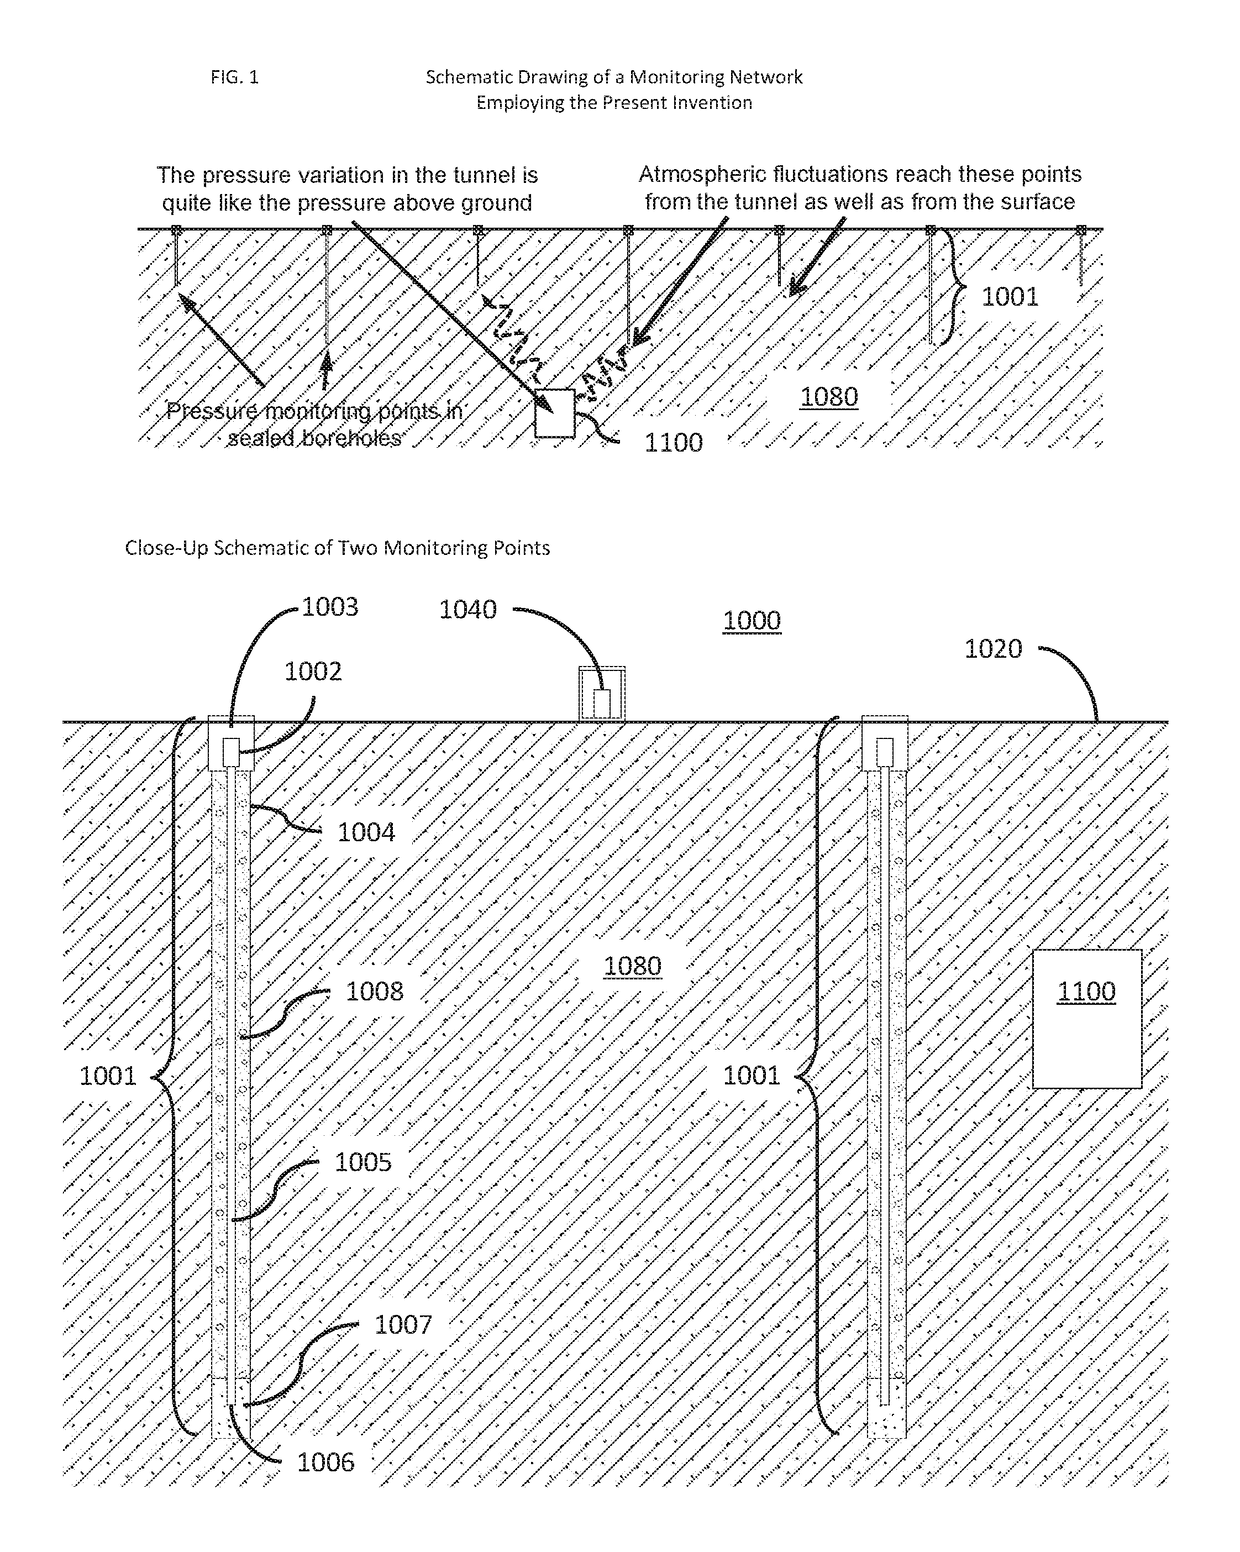 Systems, Methods, and Software For Detecting The Presence of Subterranean Tunnels and Tunneling Activity